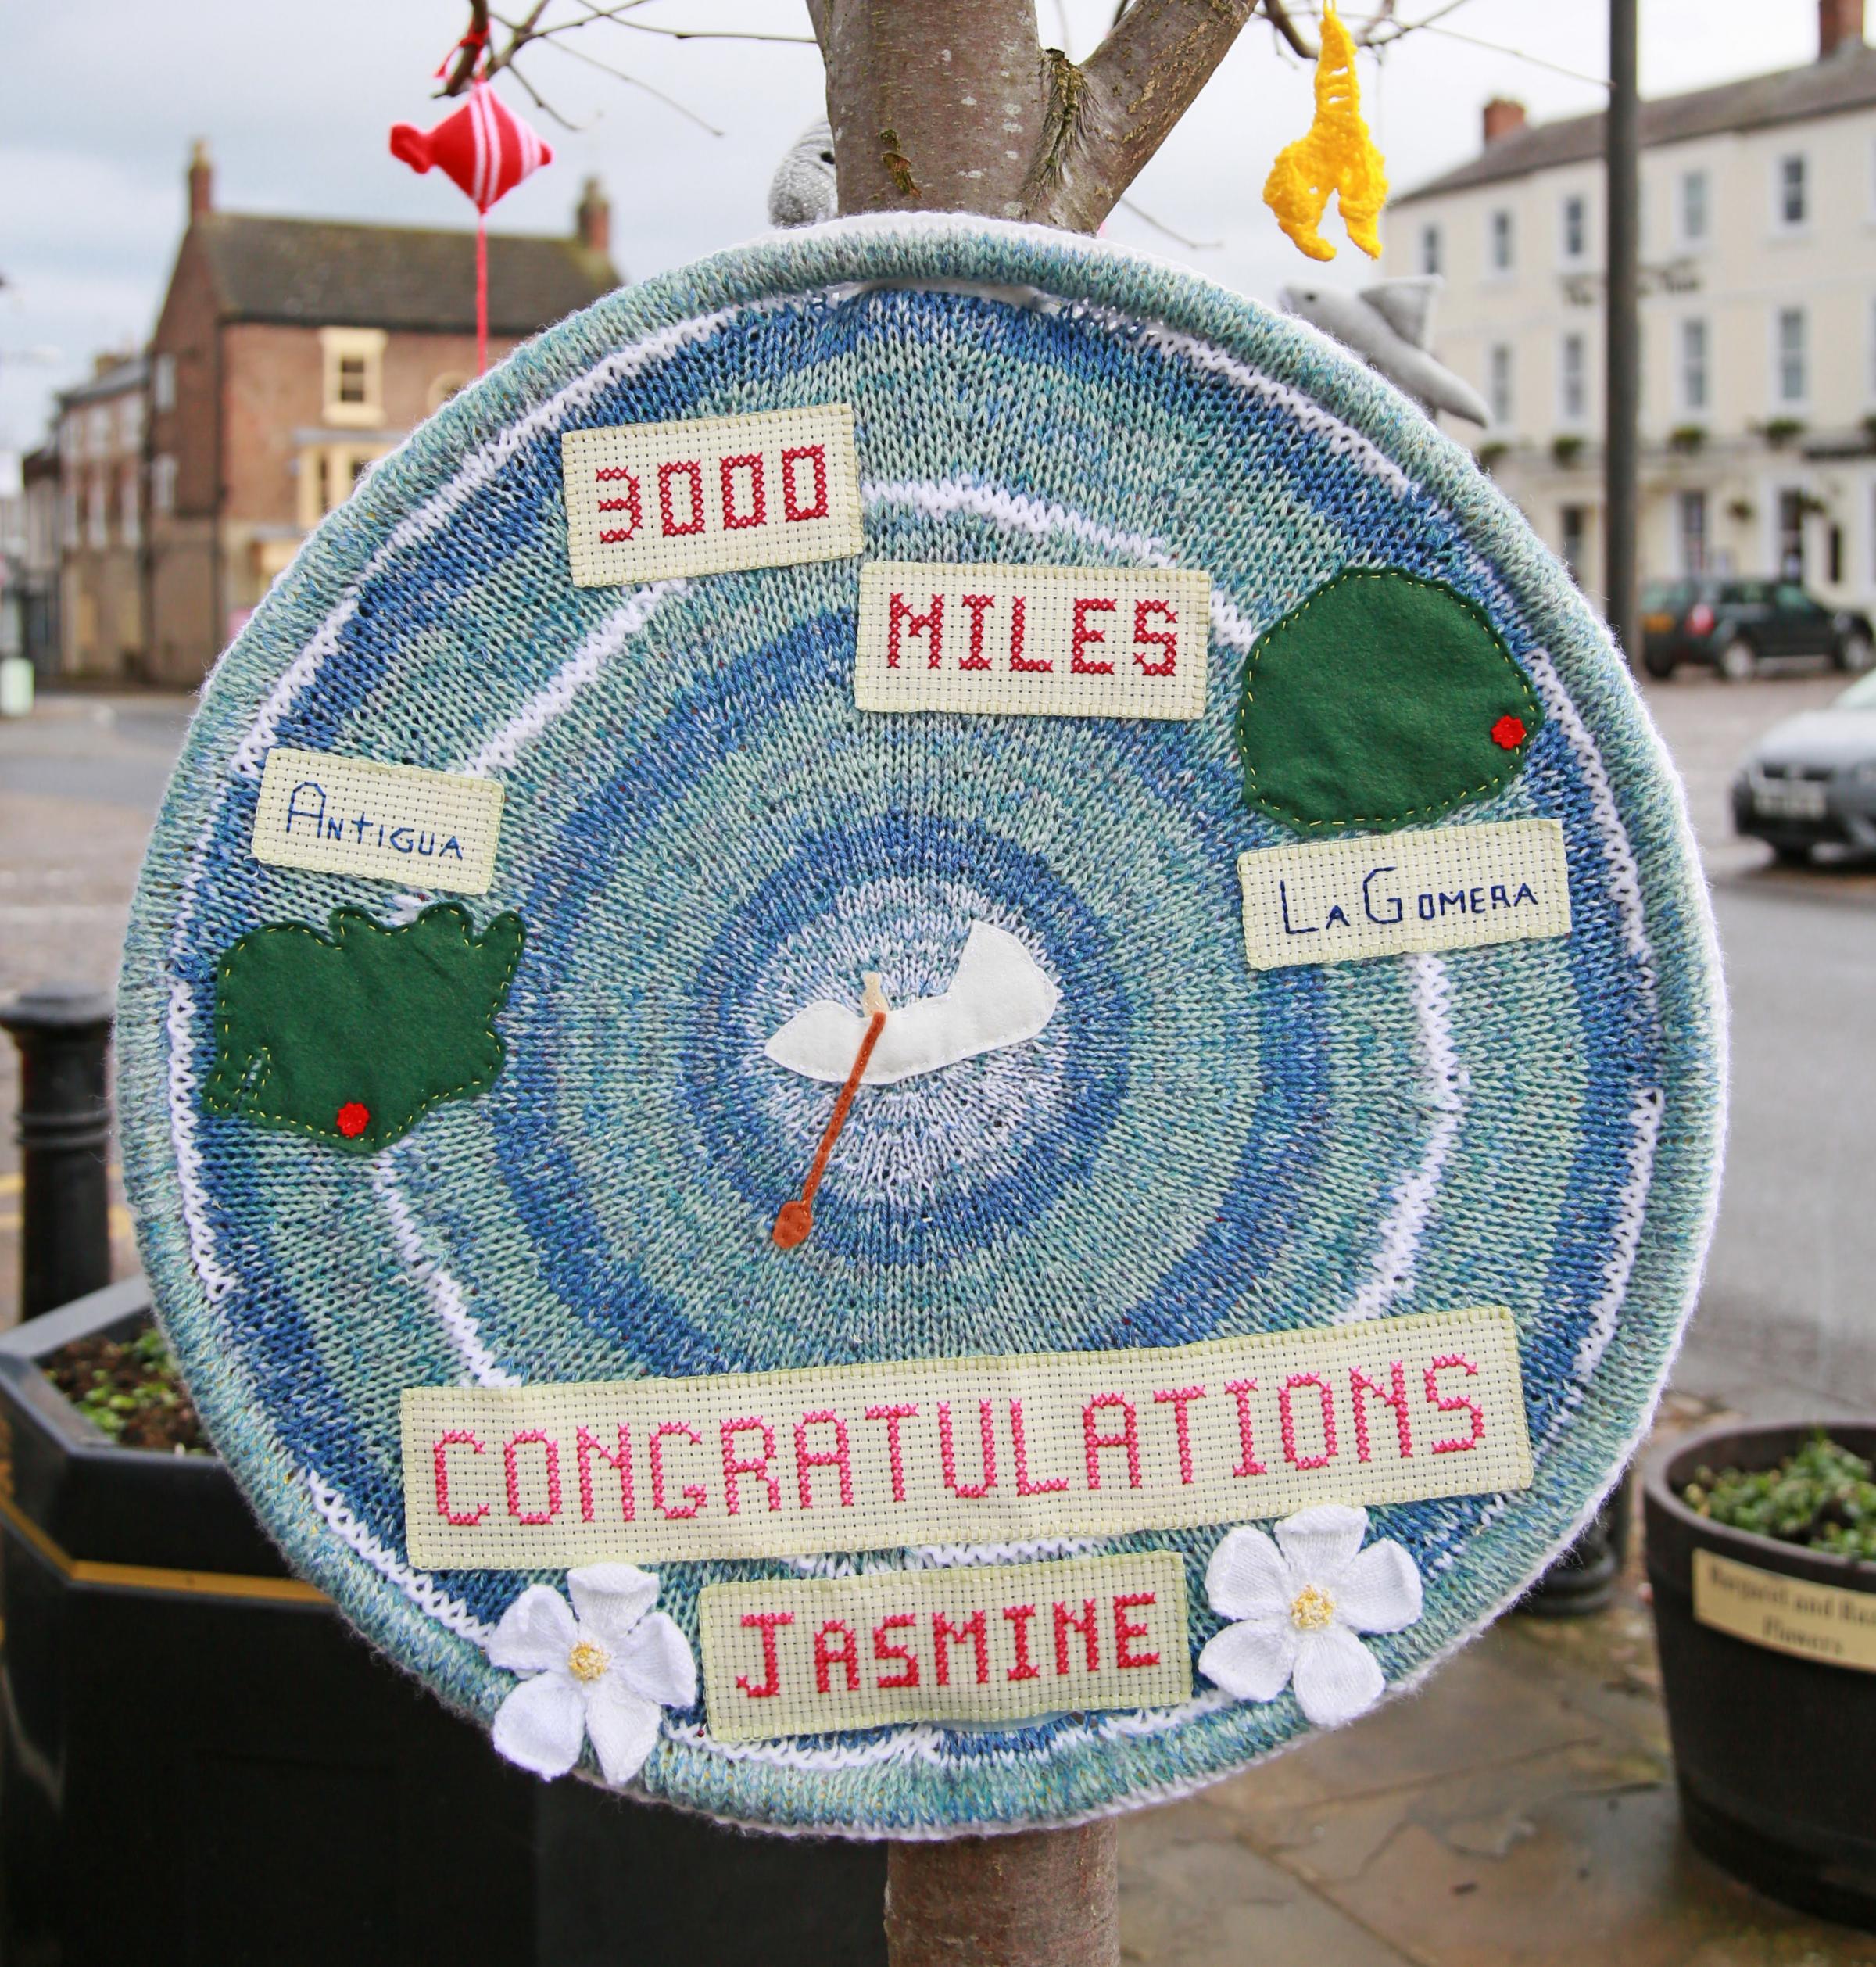 Thirsk Yarnbombers display for Jasmine Harrison, who has set a new world record of single handedly rowing across the Atlantic Picture: SARAH CALDECOTT